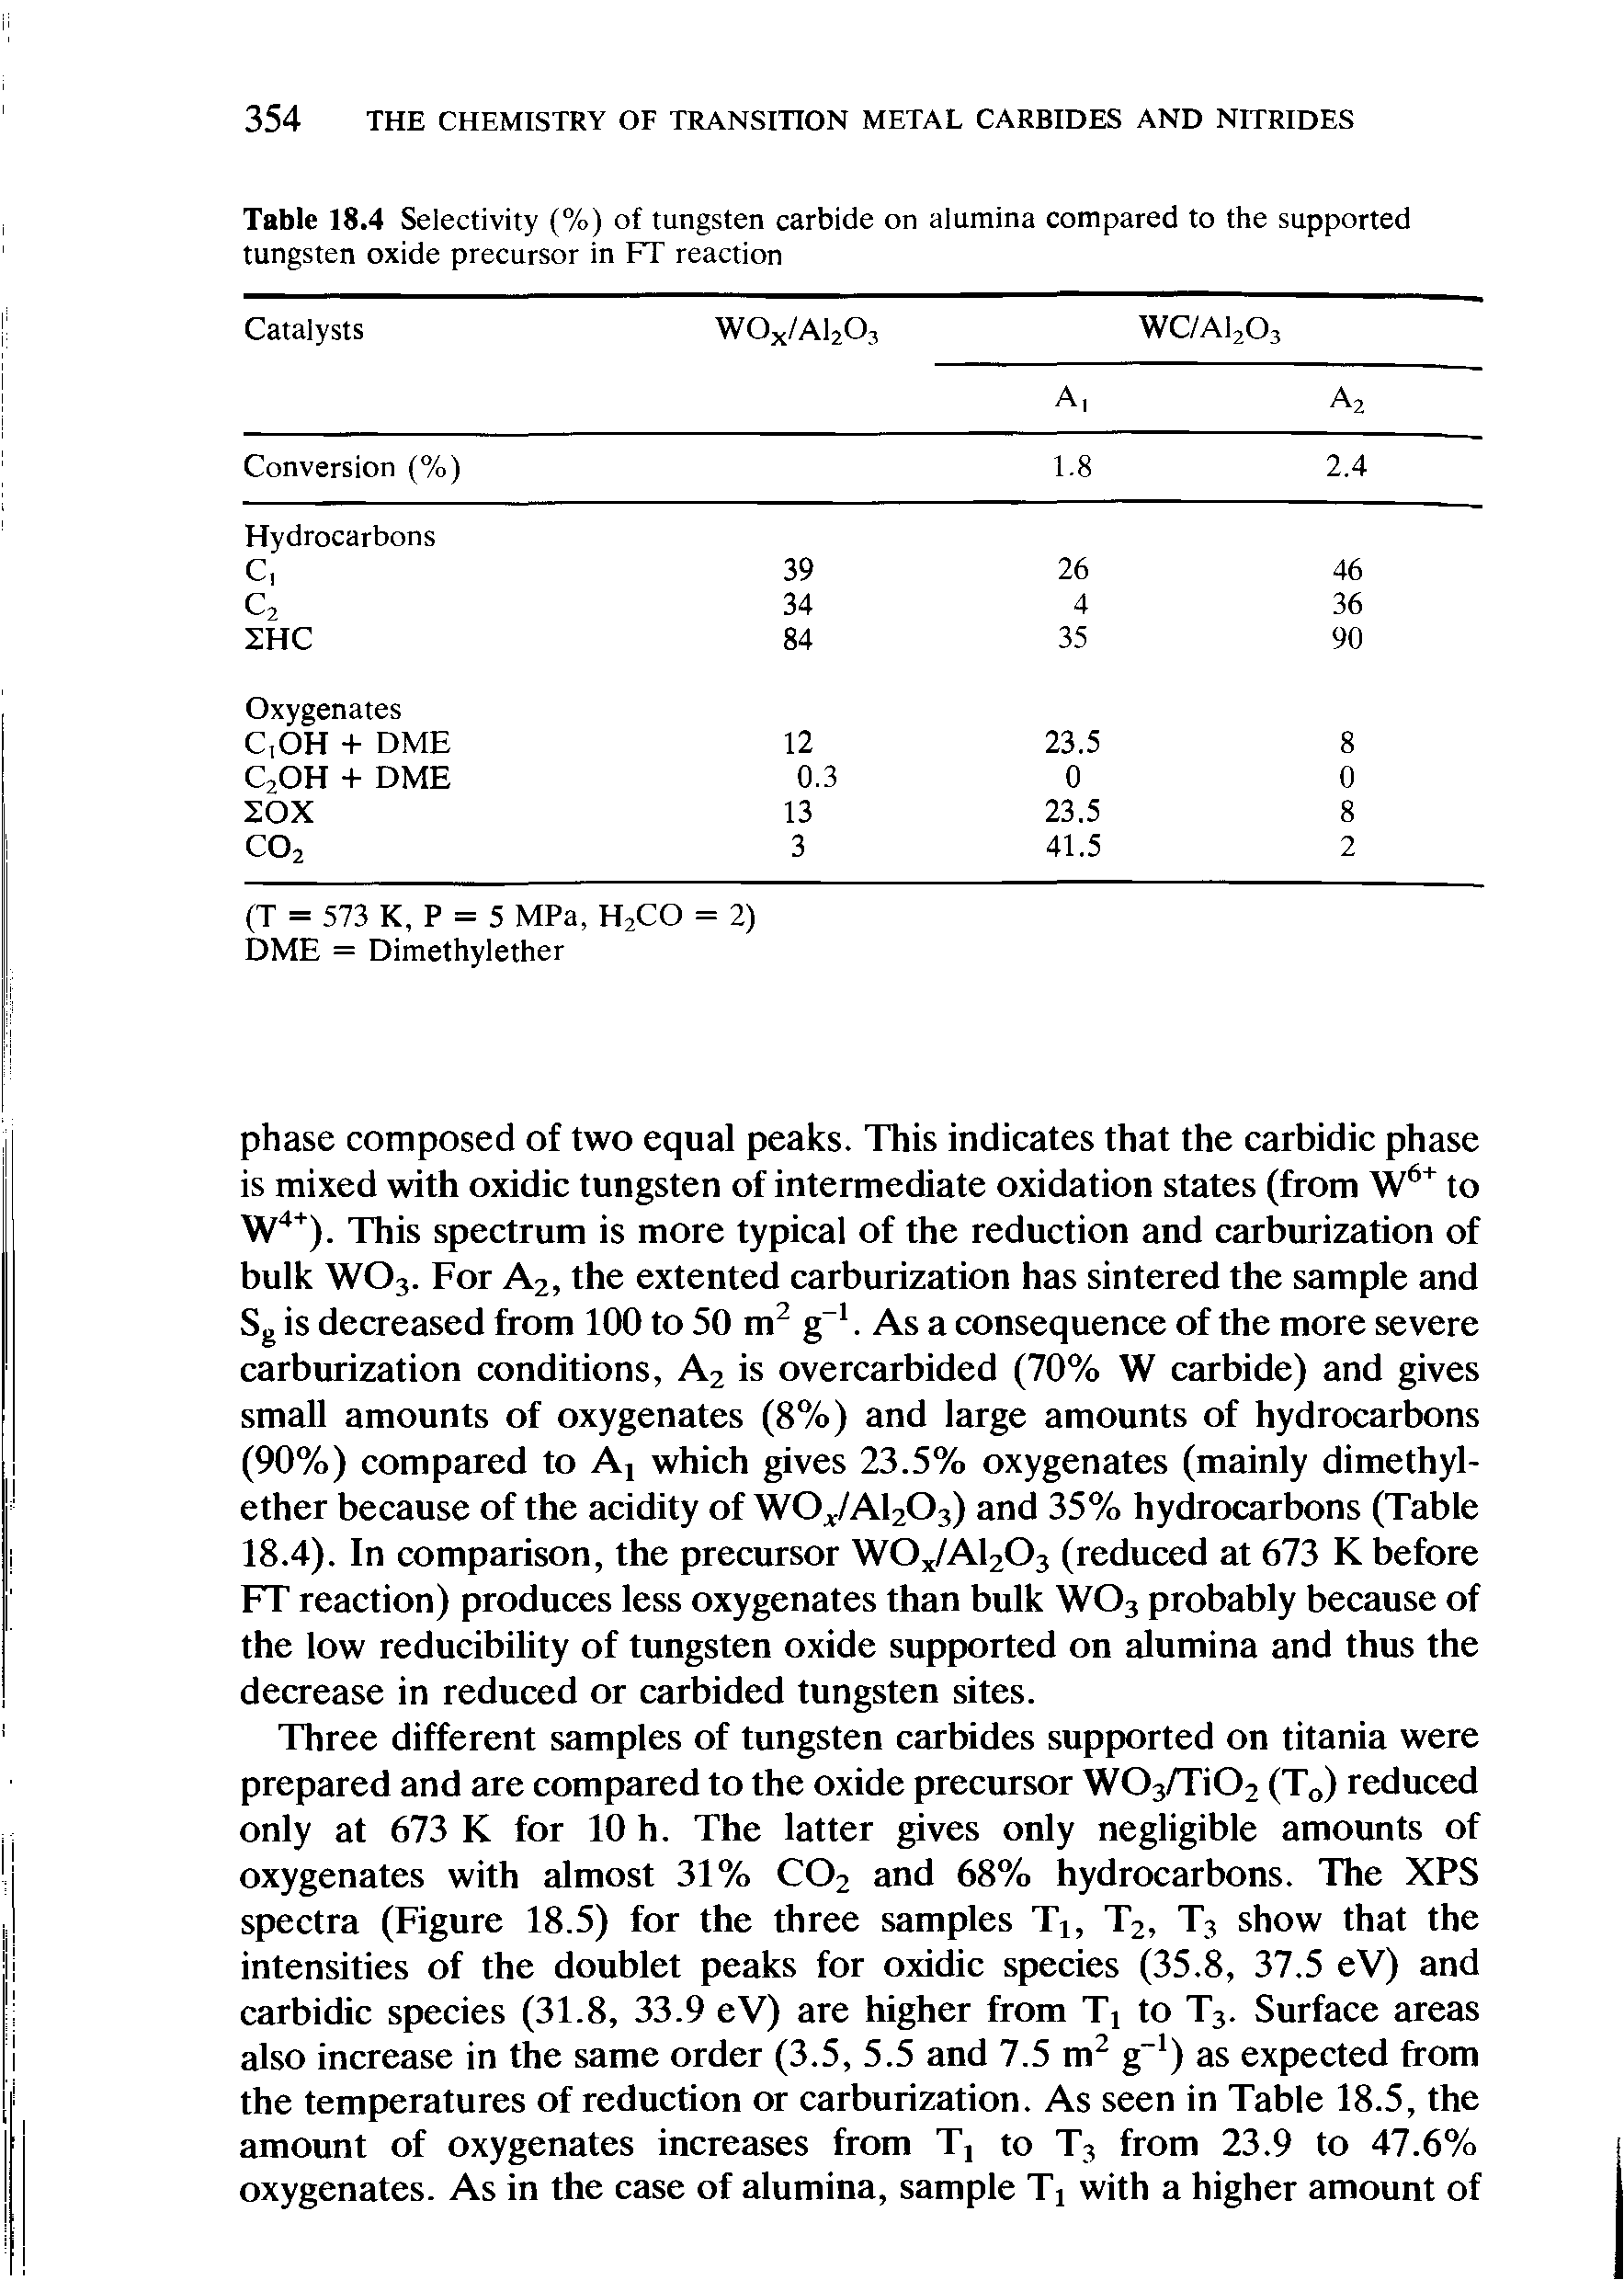 Table 18.4 Selectivity (%) of tungsten carbide on alumina compared to the supported tungsten oxide precursor in FT reaction...